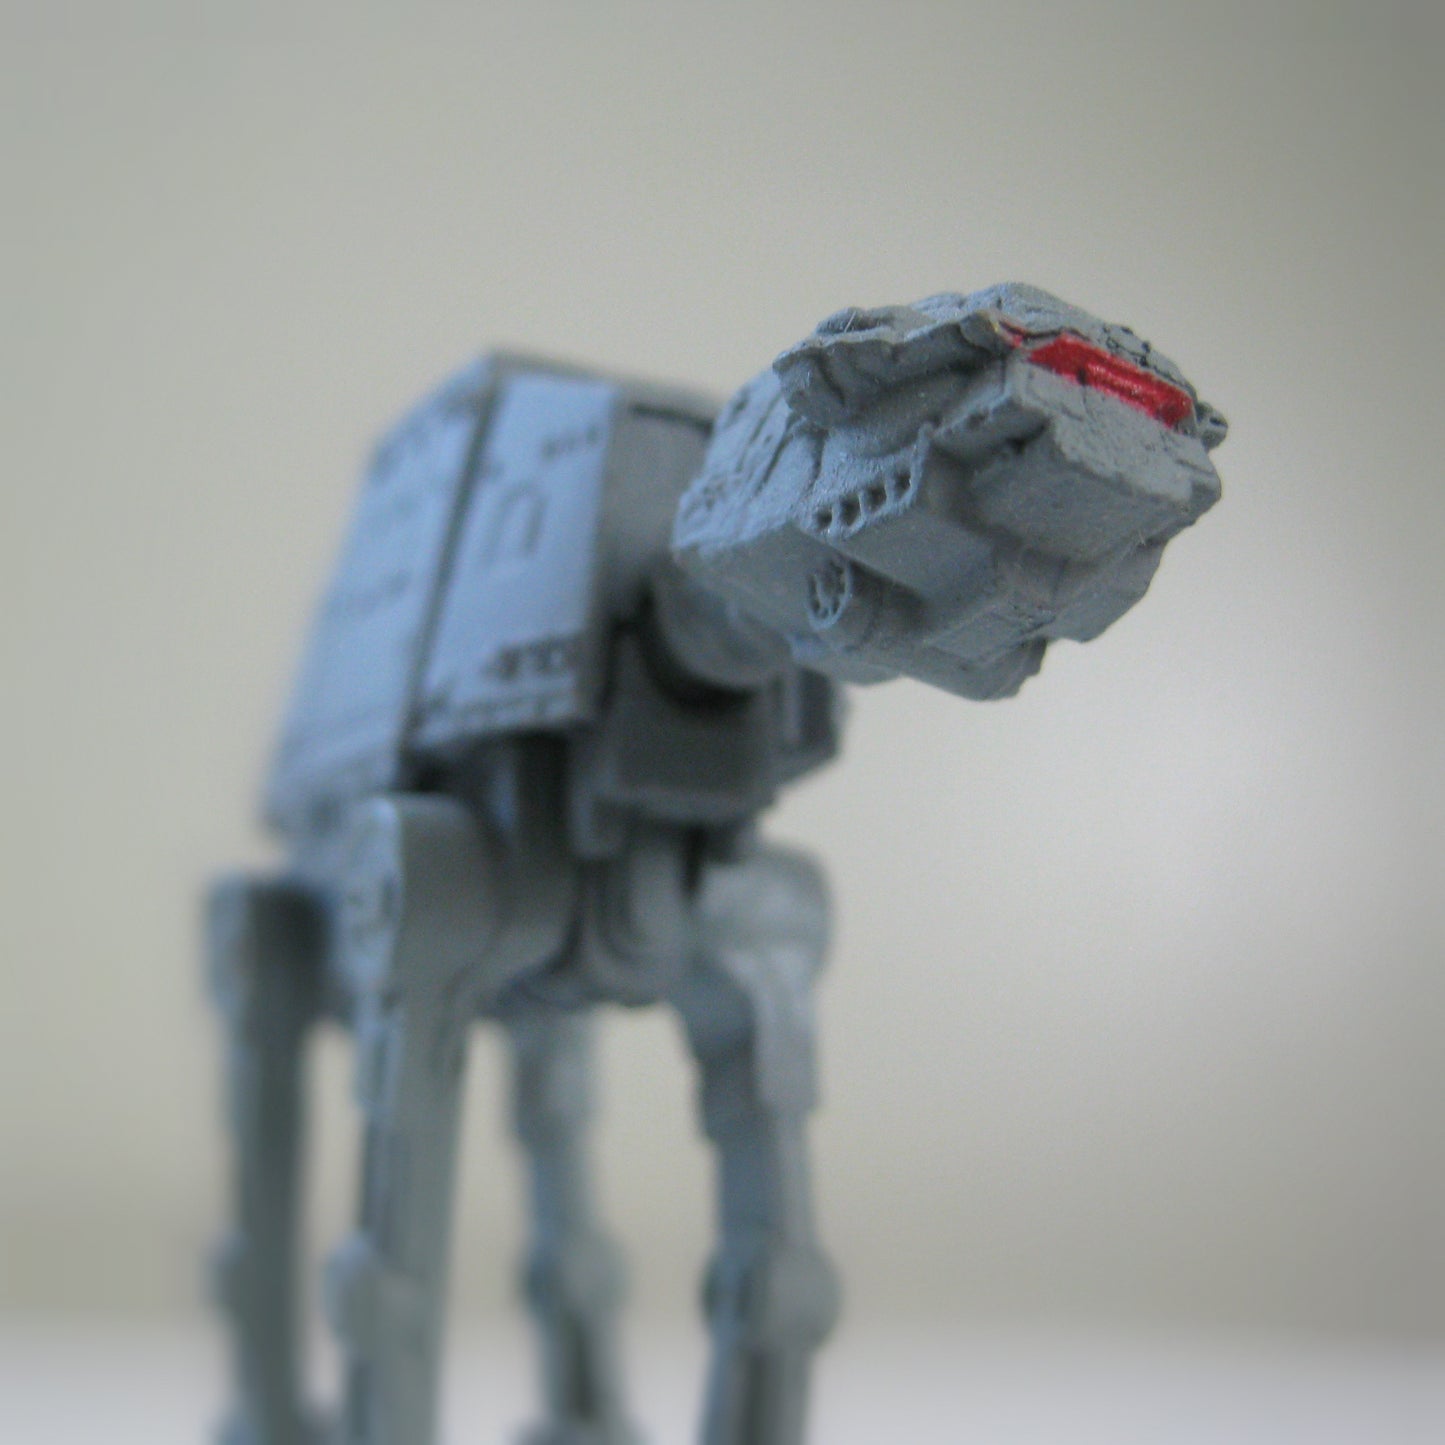 Ground level view of a 2" miniature Star Wars Imperial AT-AT Walker toy model.